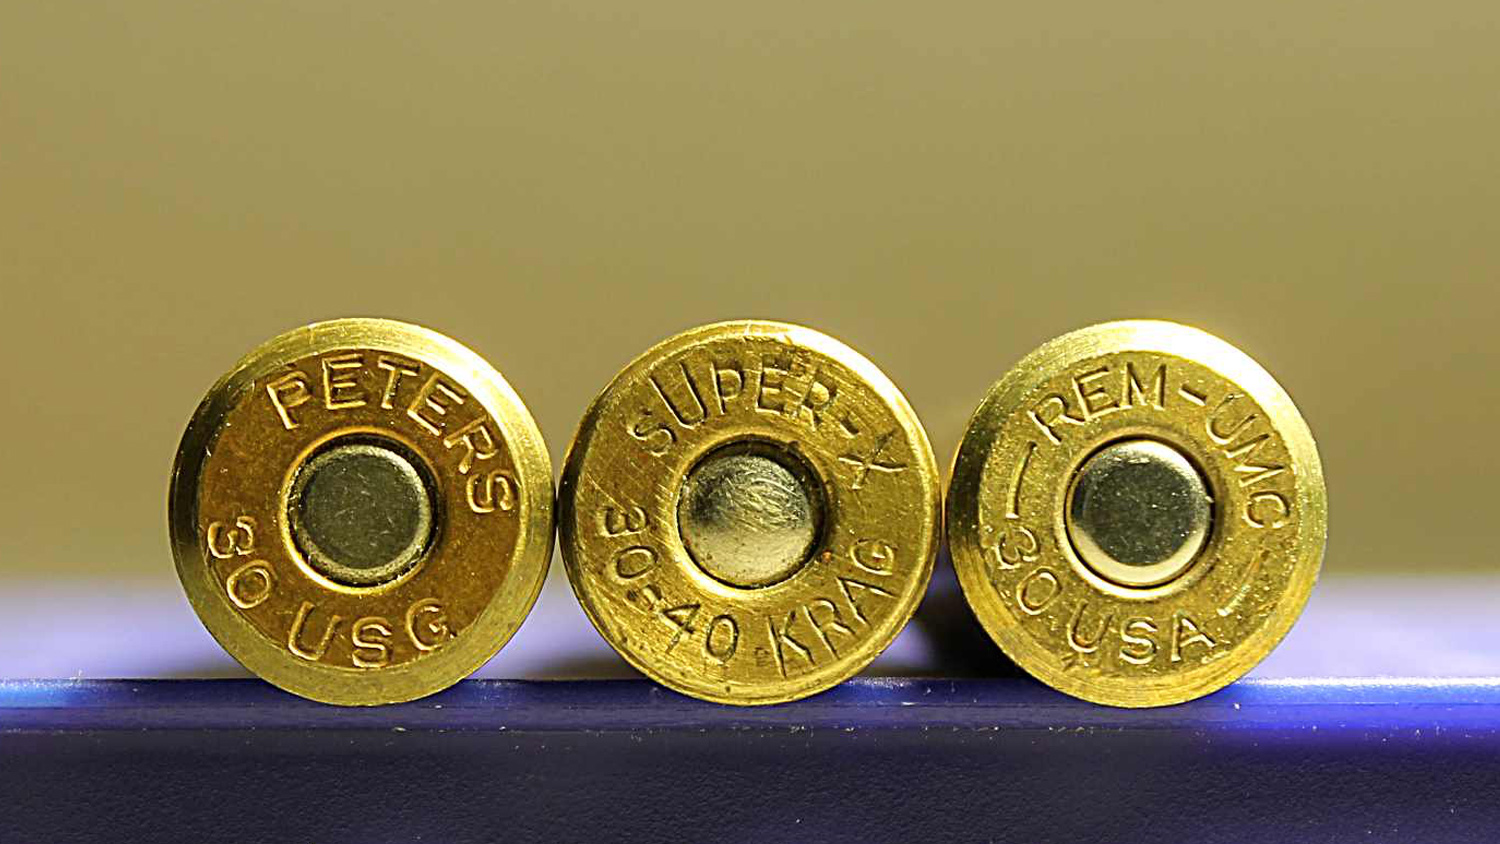 Commercial .30-40 brass headstamps